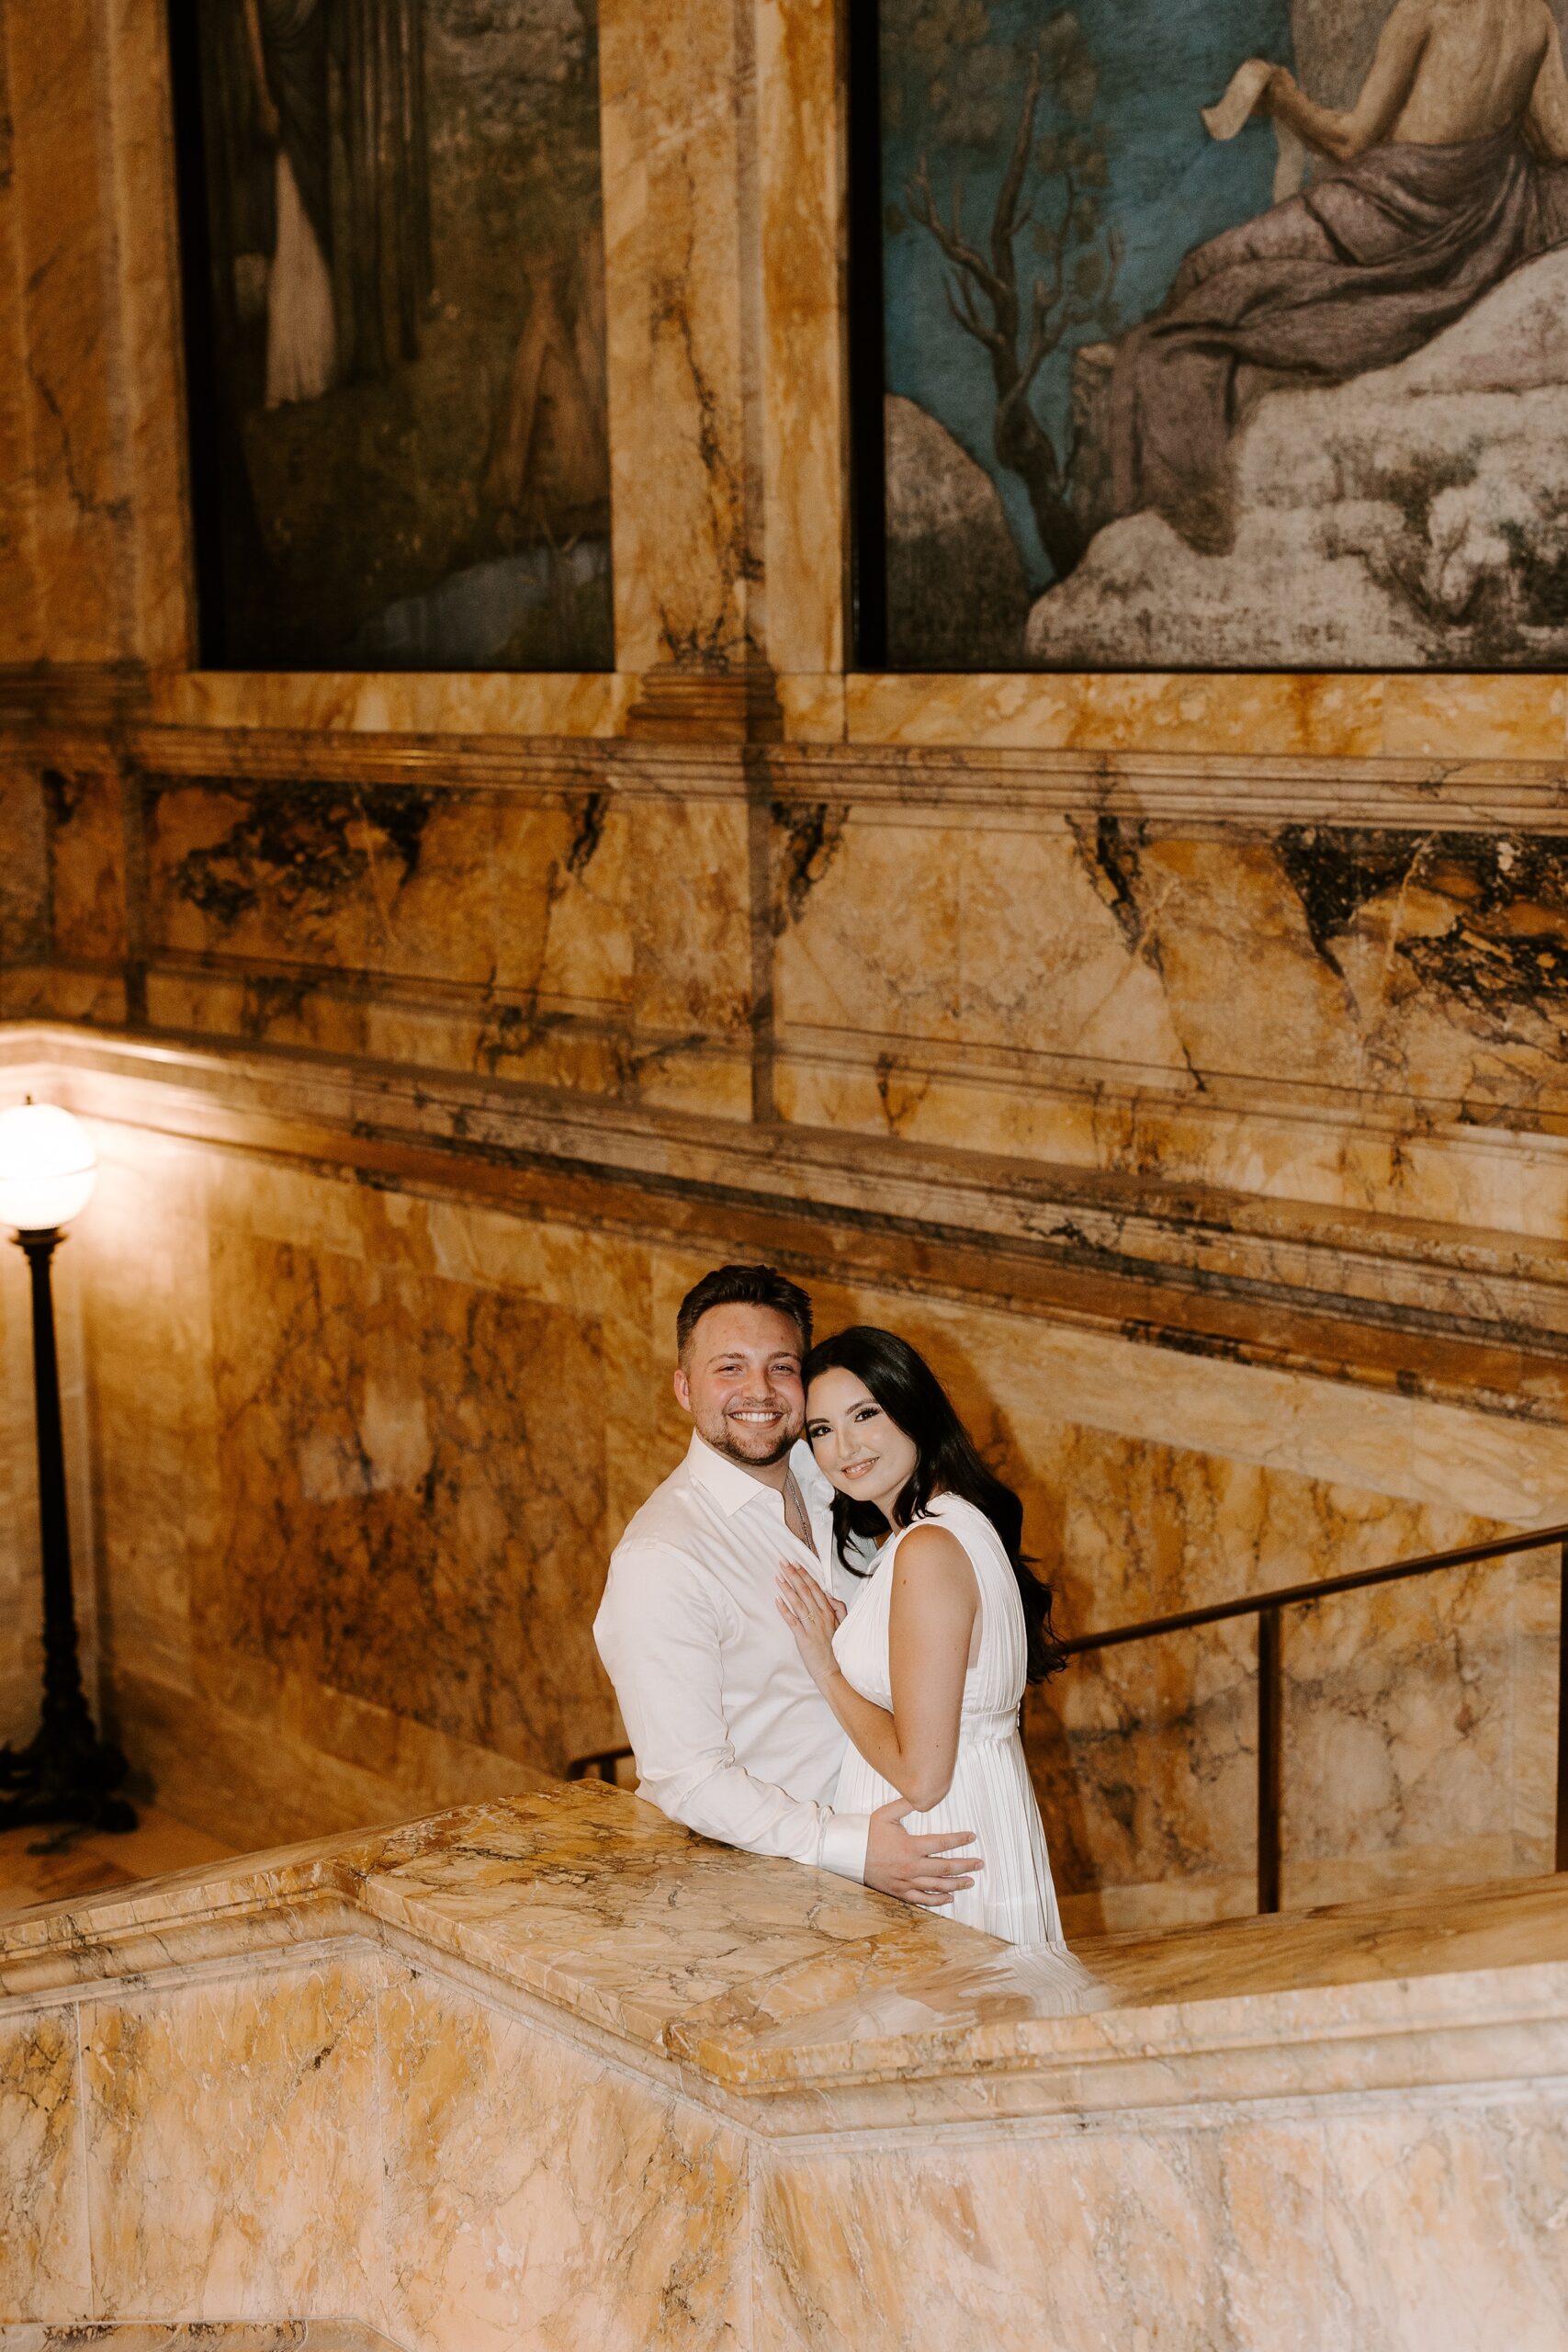 Man and woman smile at camera during Boston Public Library engagement session